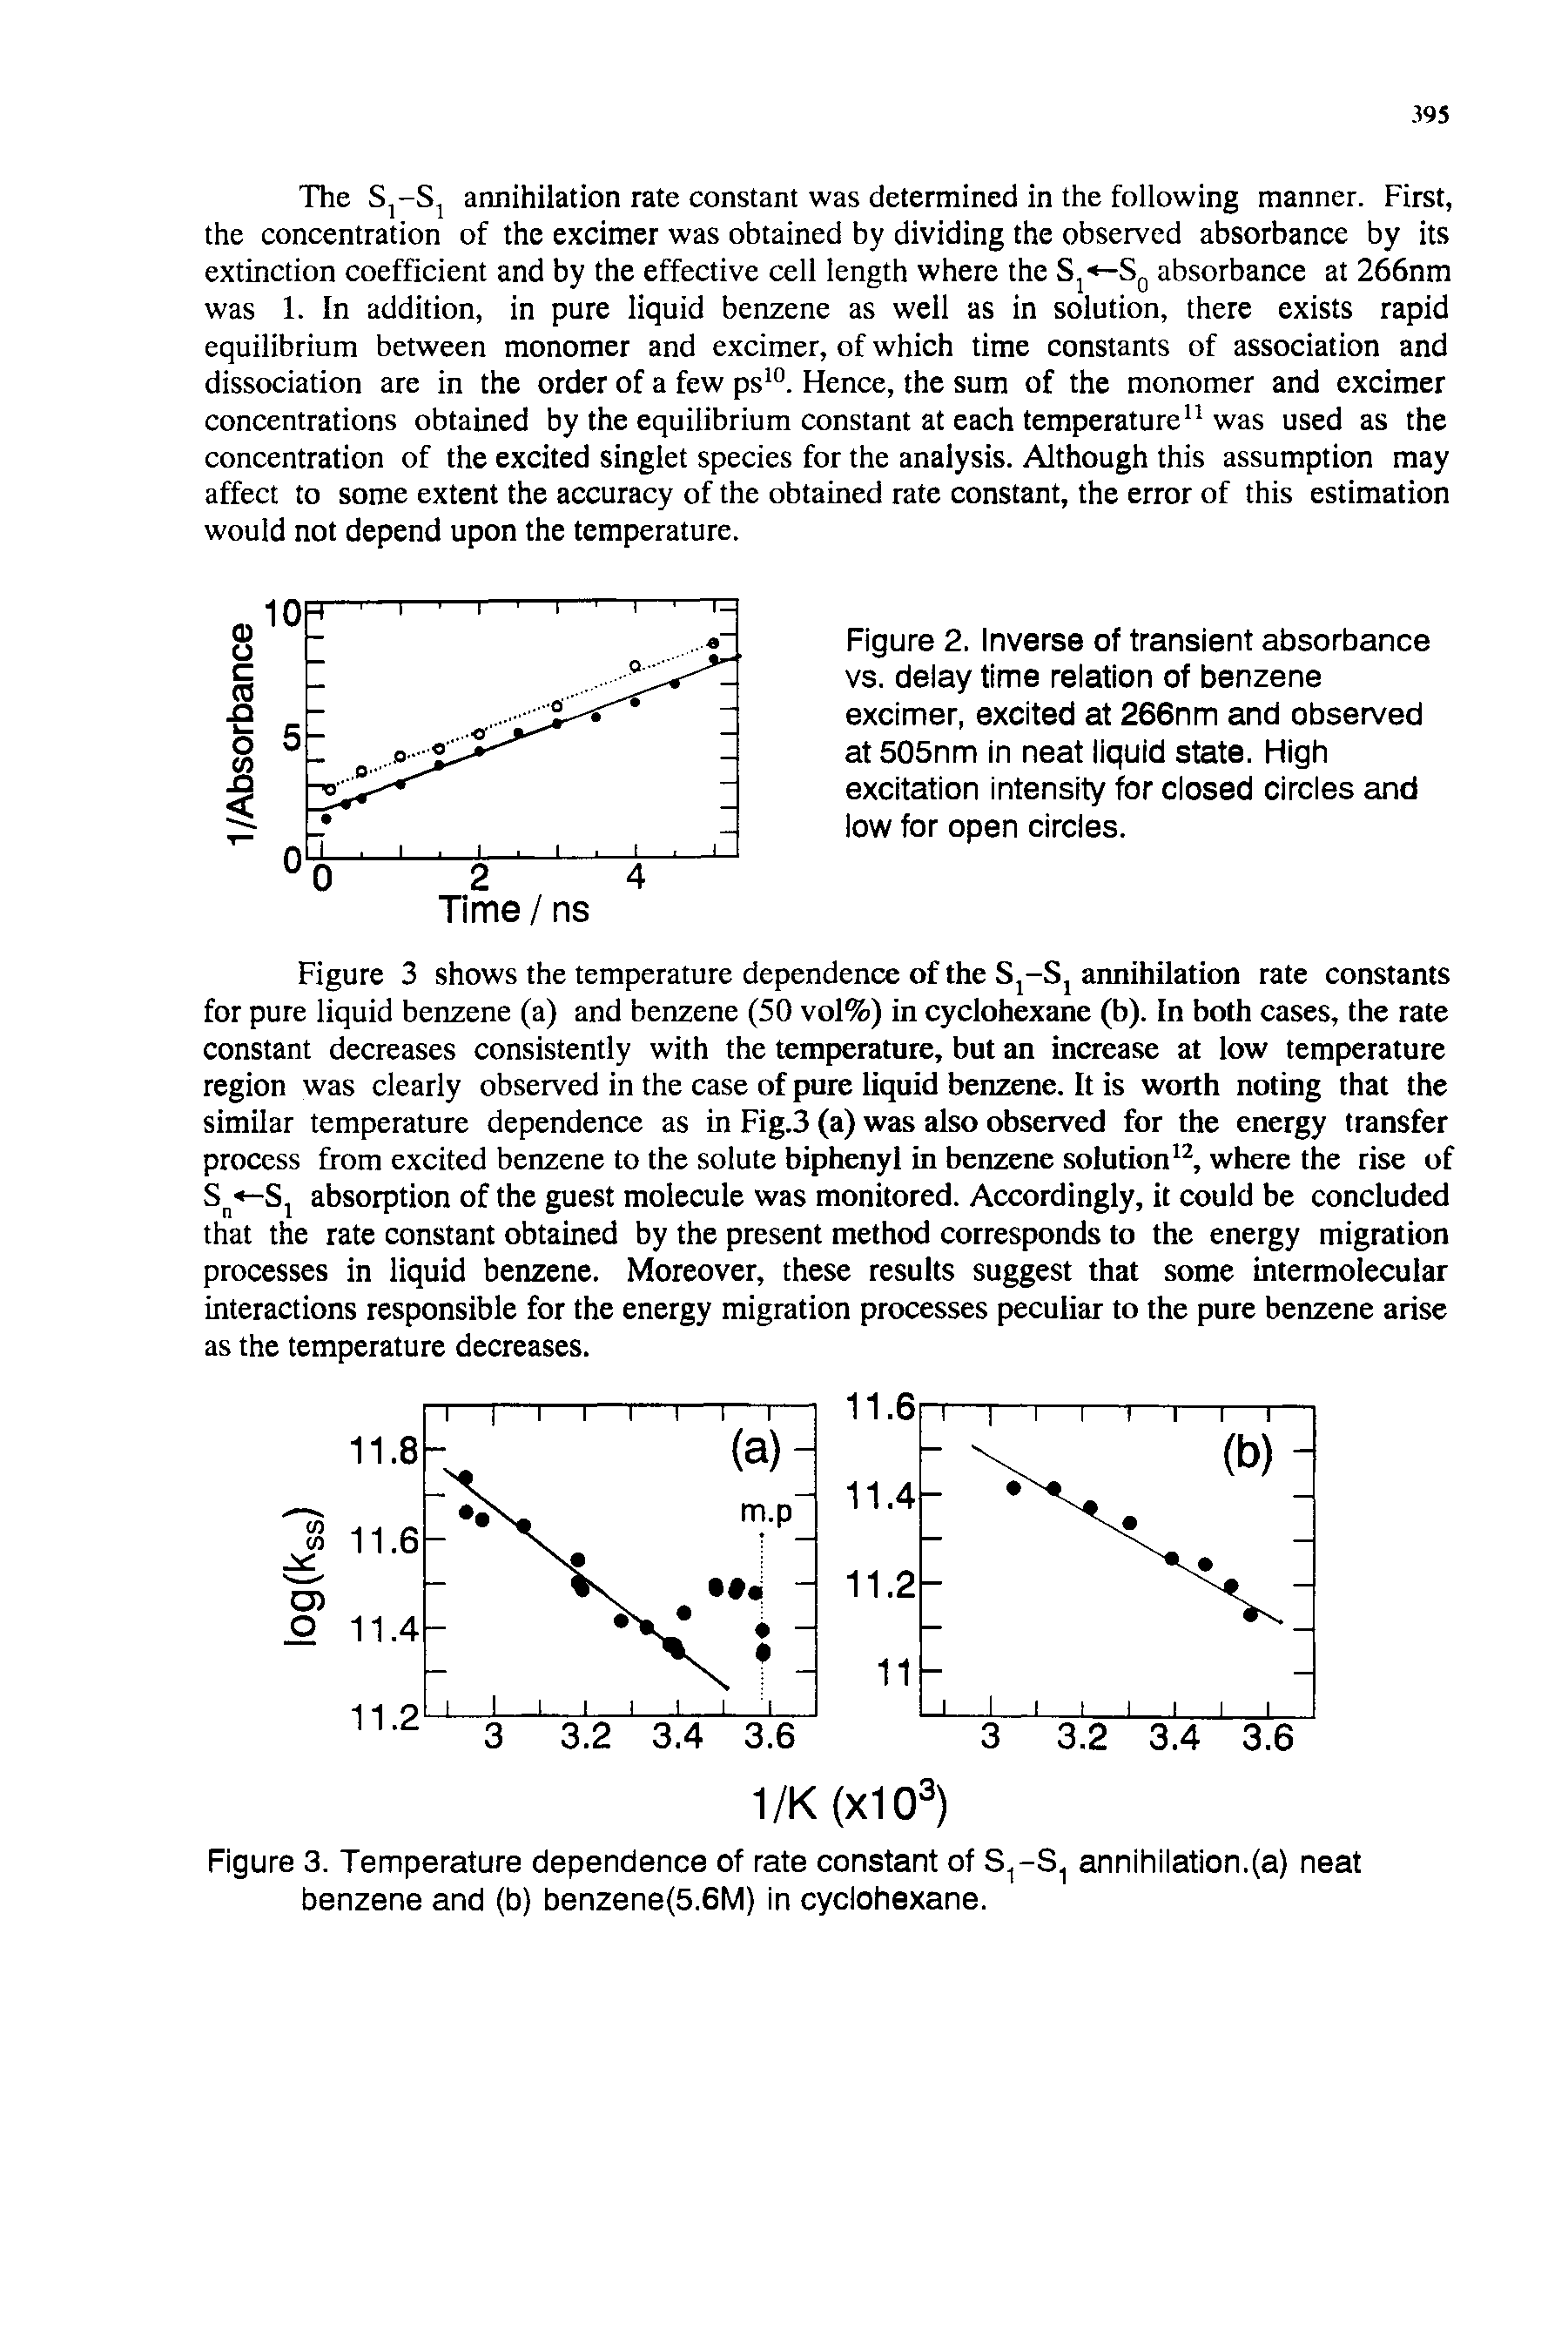 Figure 2. Inverse of transient absorbance vs. deiay time reiation of benzene excimer, excited at 266nm and observed at 505nm in neat liquid state. High excitation intensity for closed circles and lo w for open circles.